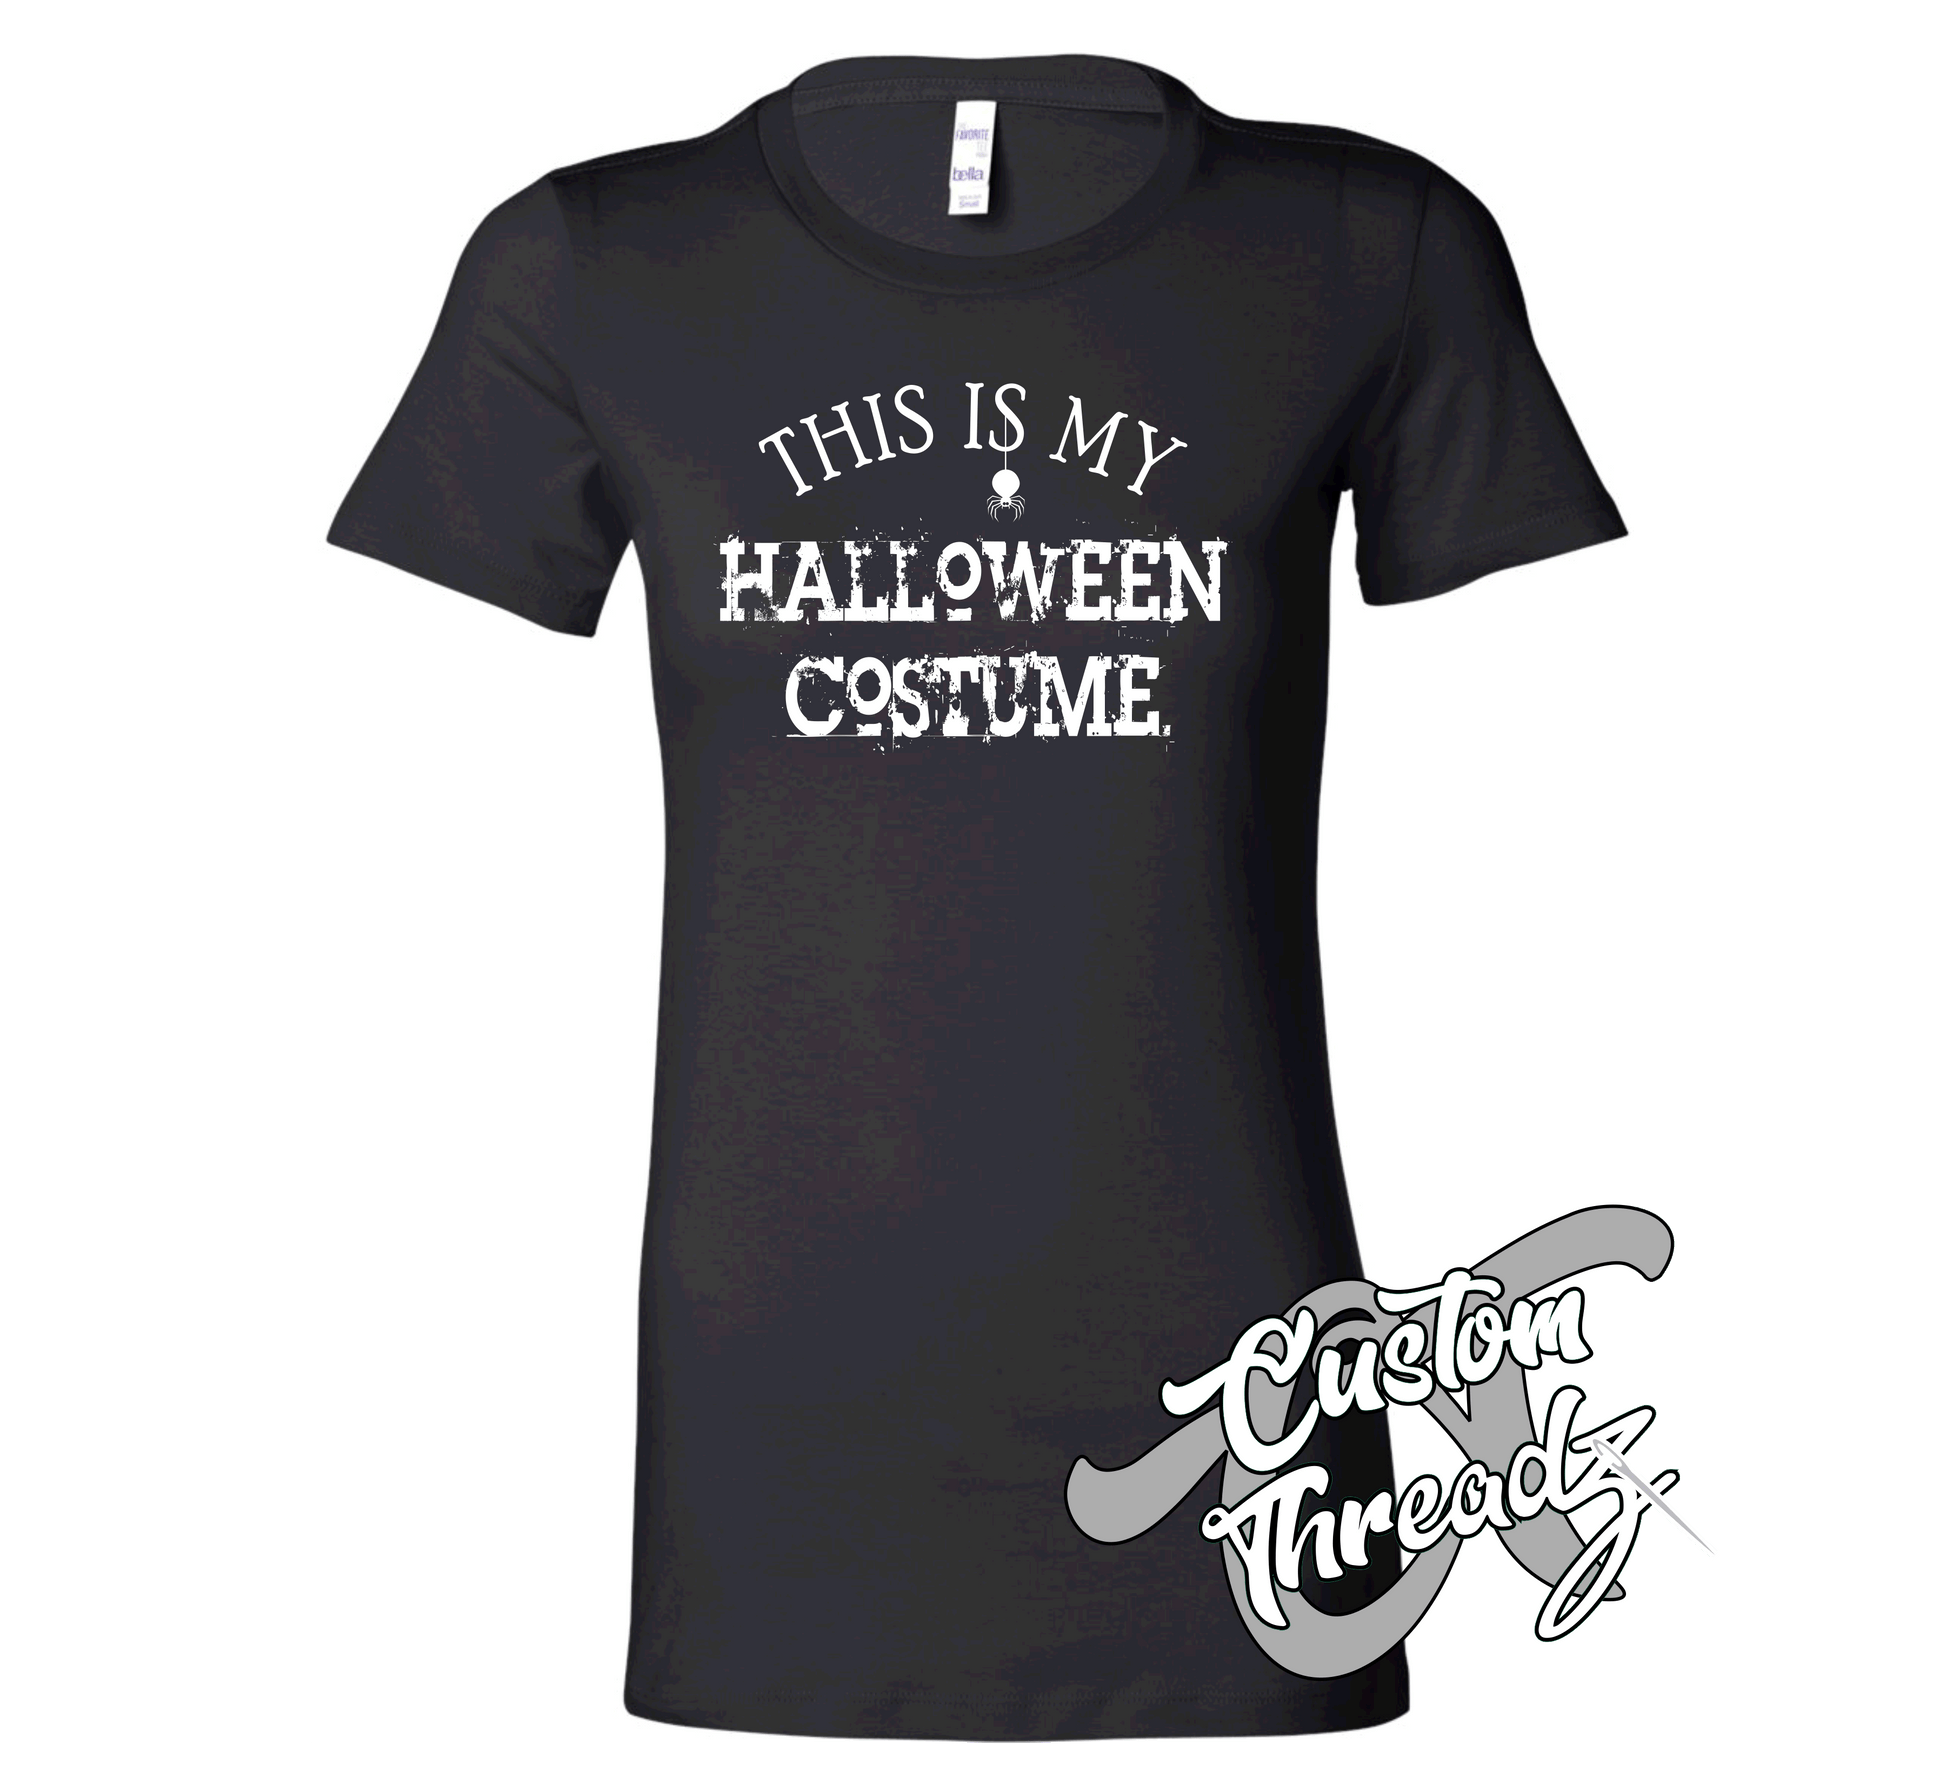 black womens tee with this is my halloween costume DTG printed design